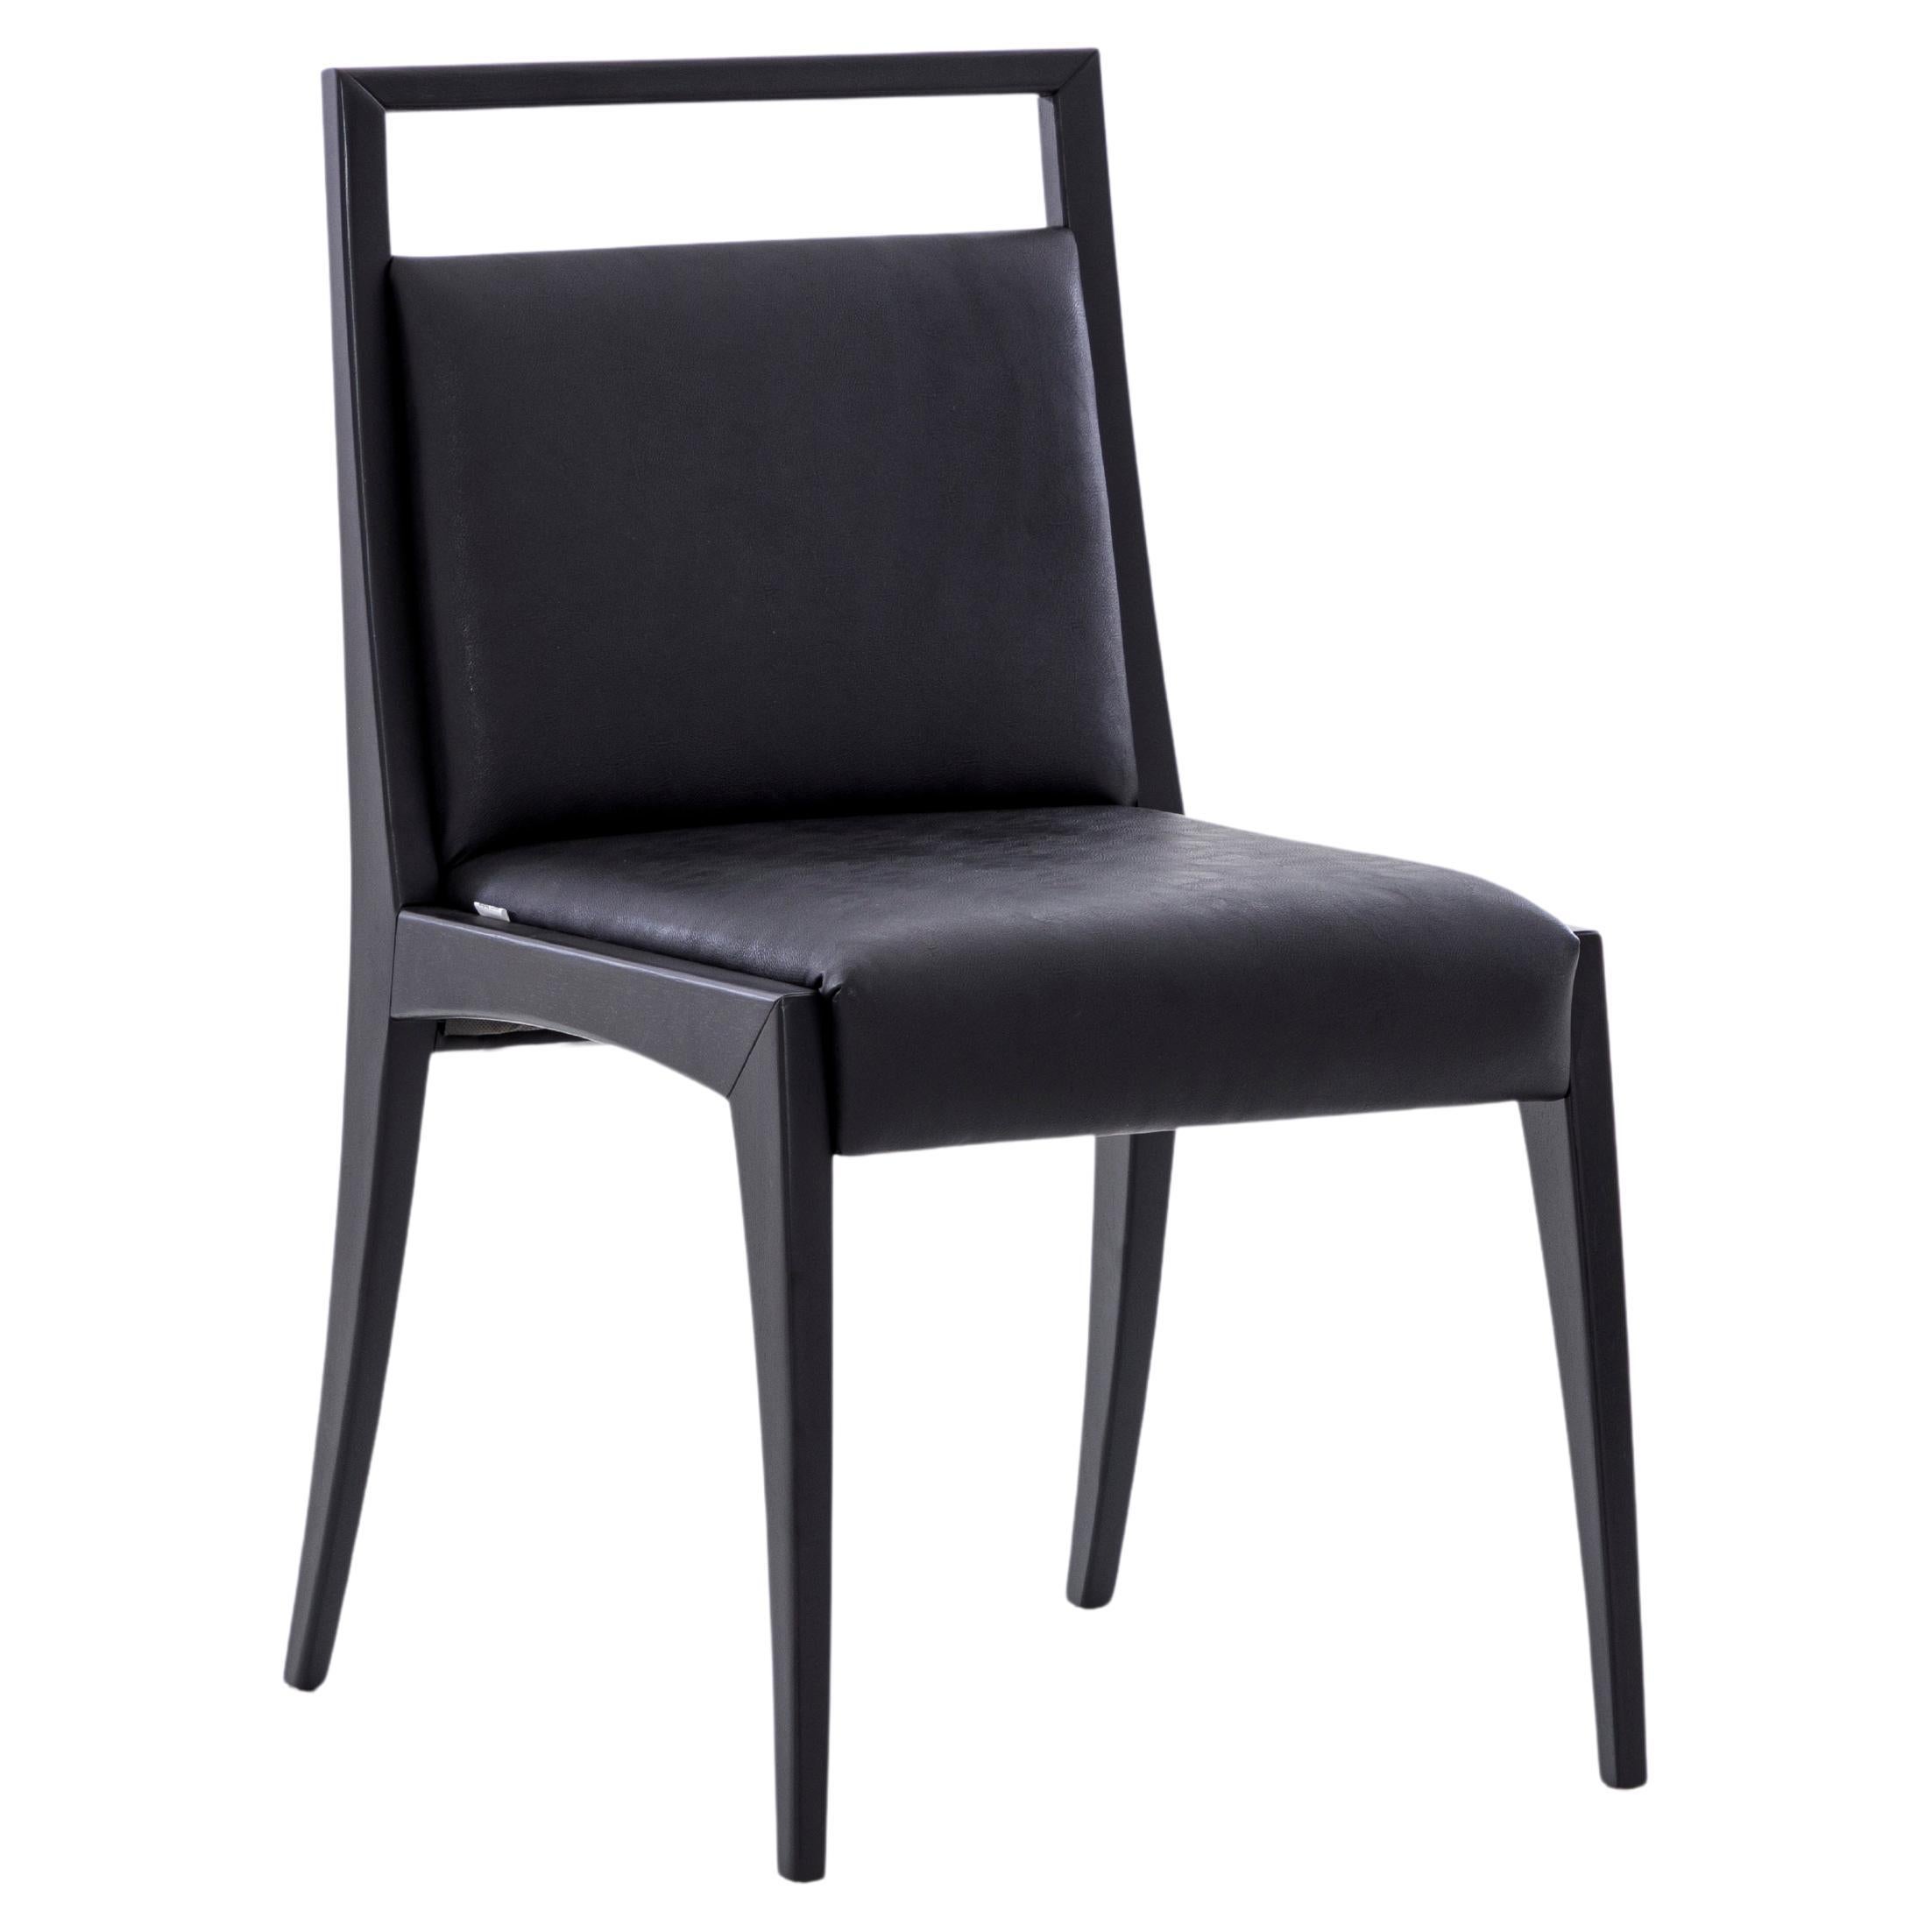 Putting a lot of effort our amazing Uultis team has created the Sotto dining chair, thinking of every possible detail like the open top rail in a black wood finish that goes perfectly with the black fabric. This pair of chairs are beautiful and